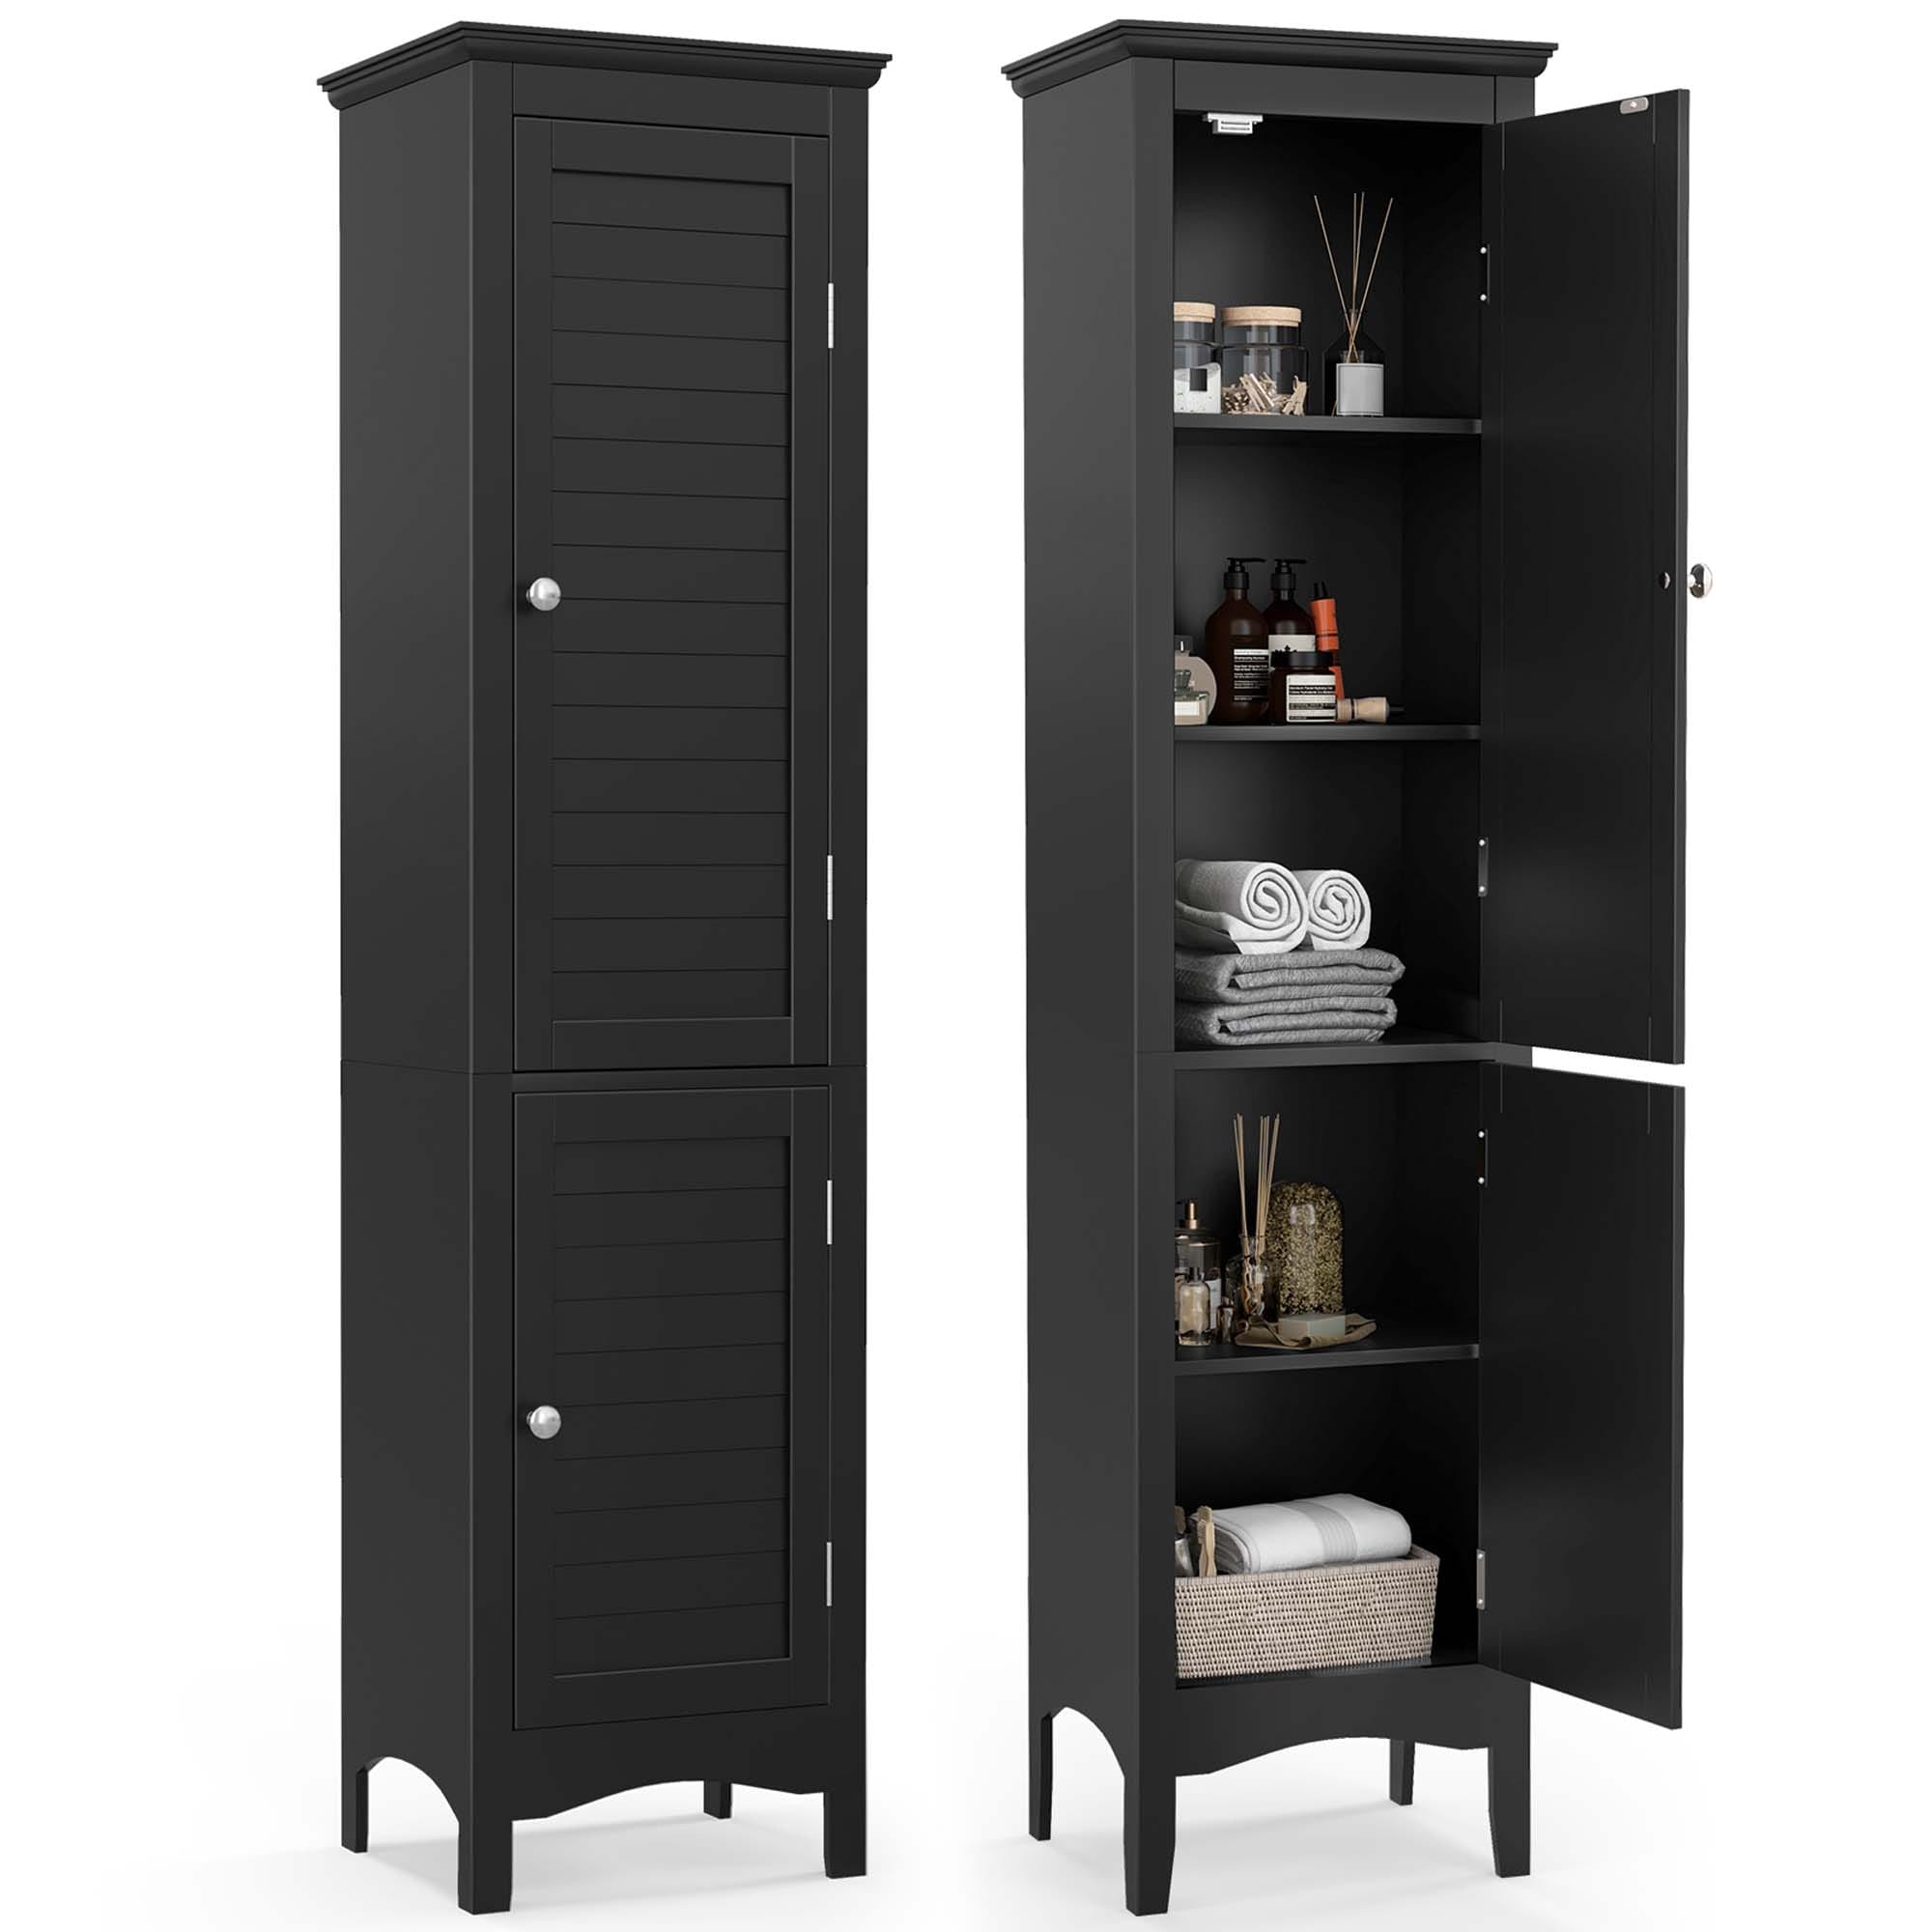 https://ak1.ostkcdn.com/images/products/is/images/direct/0bb7aec9ad4dc82867fda014954e1ccabc14ef79/Costway-Tall-Bathroom-Floor-Cabinet-Narrow-Linen-Tower-with-2-Doors-%26.jpg